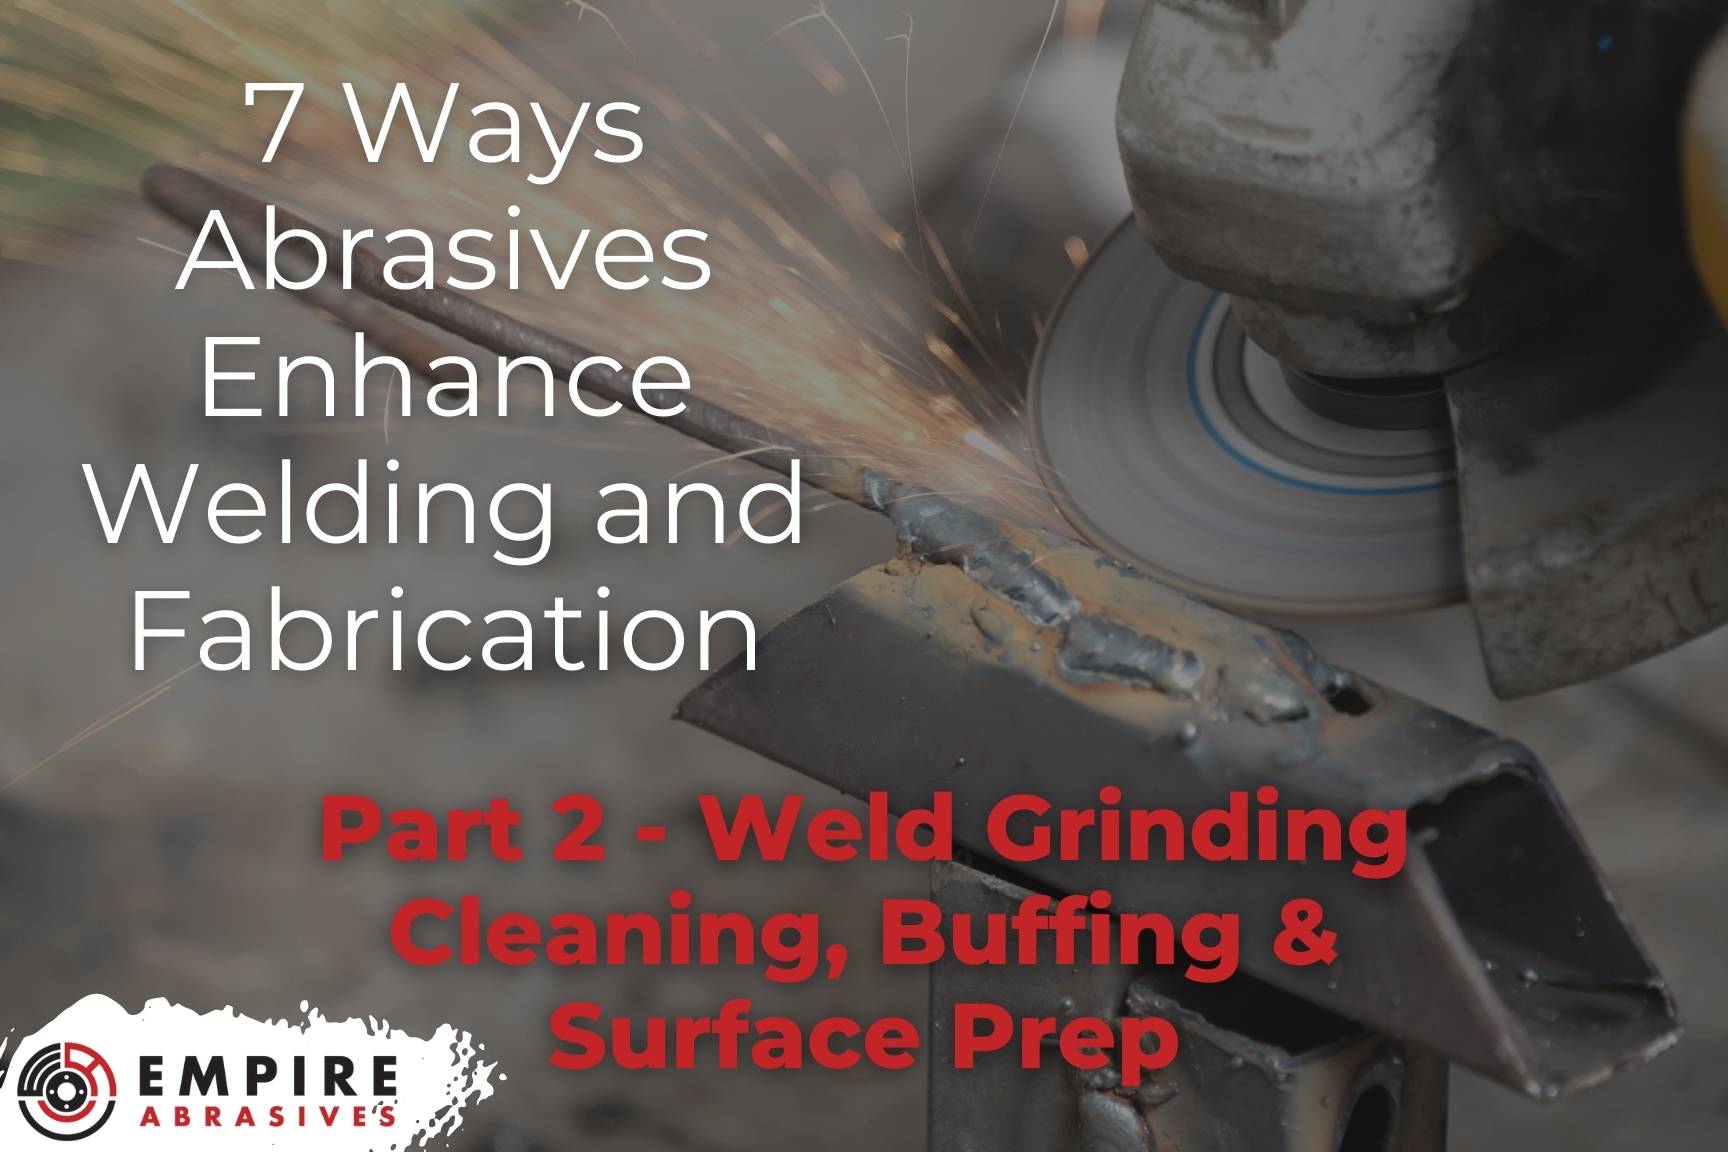 Title hero image - 7 Ways Abrasives Enhance Welding & Fabrication Part 2 Weld Grinding Cleaning Buffing & Surface Prep